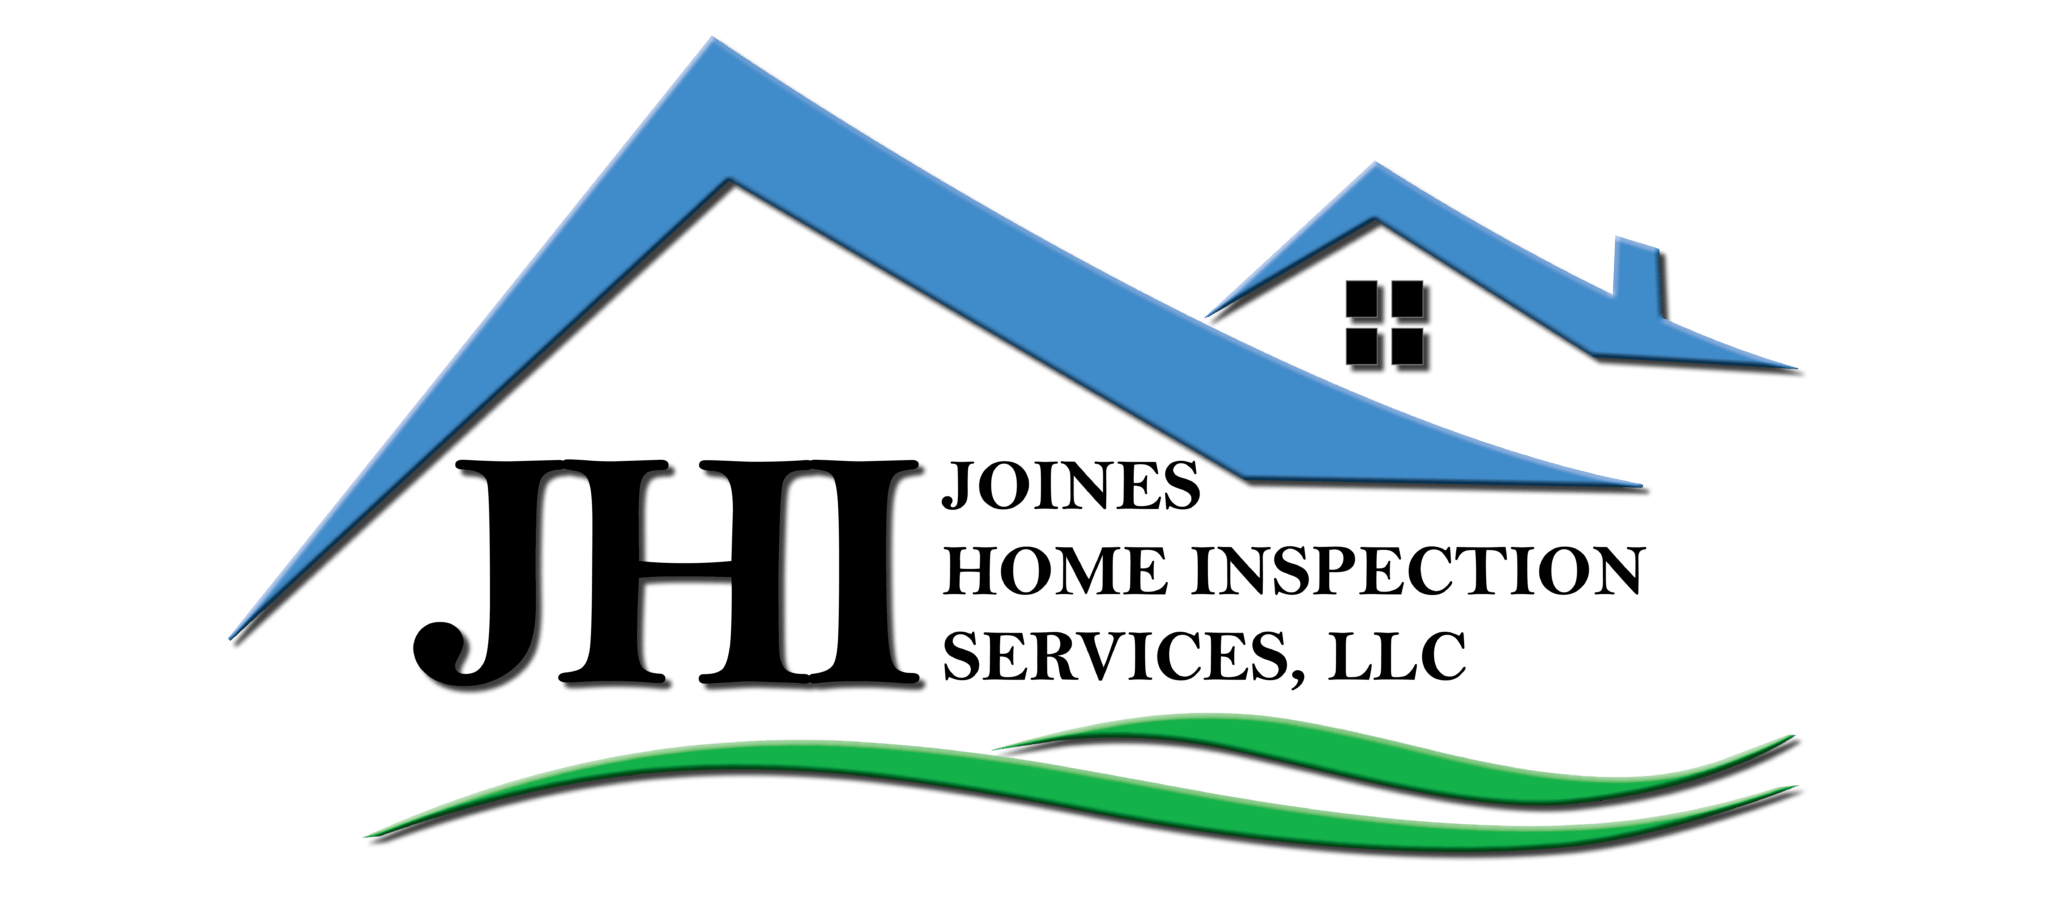 Joines Home Inspection Services LLC Logo